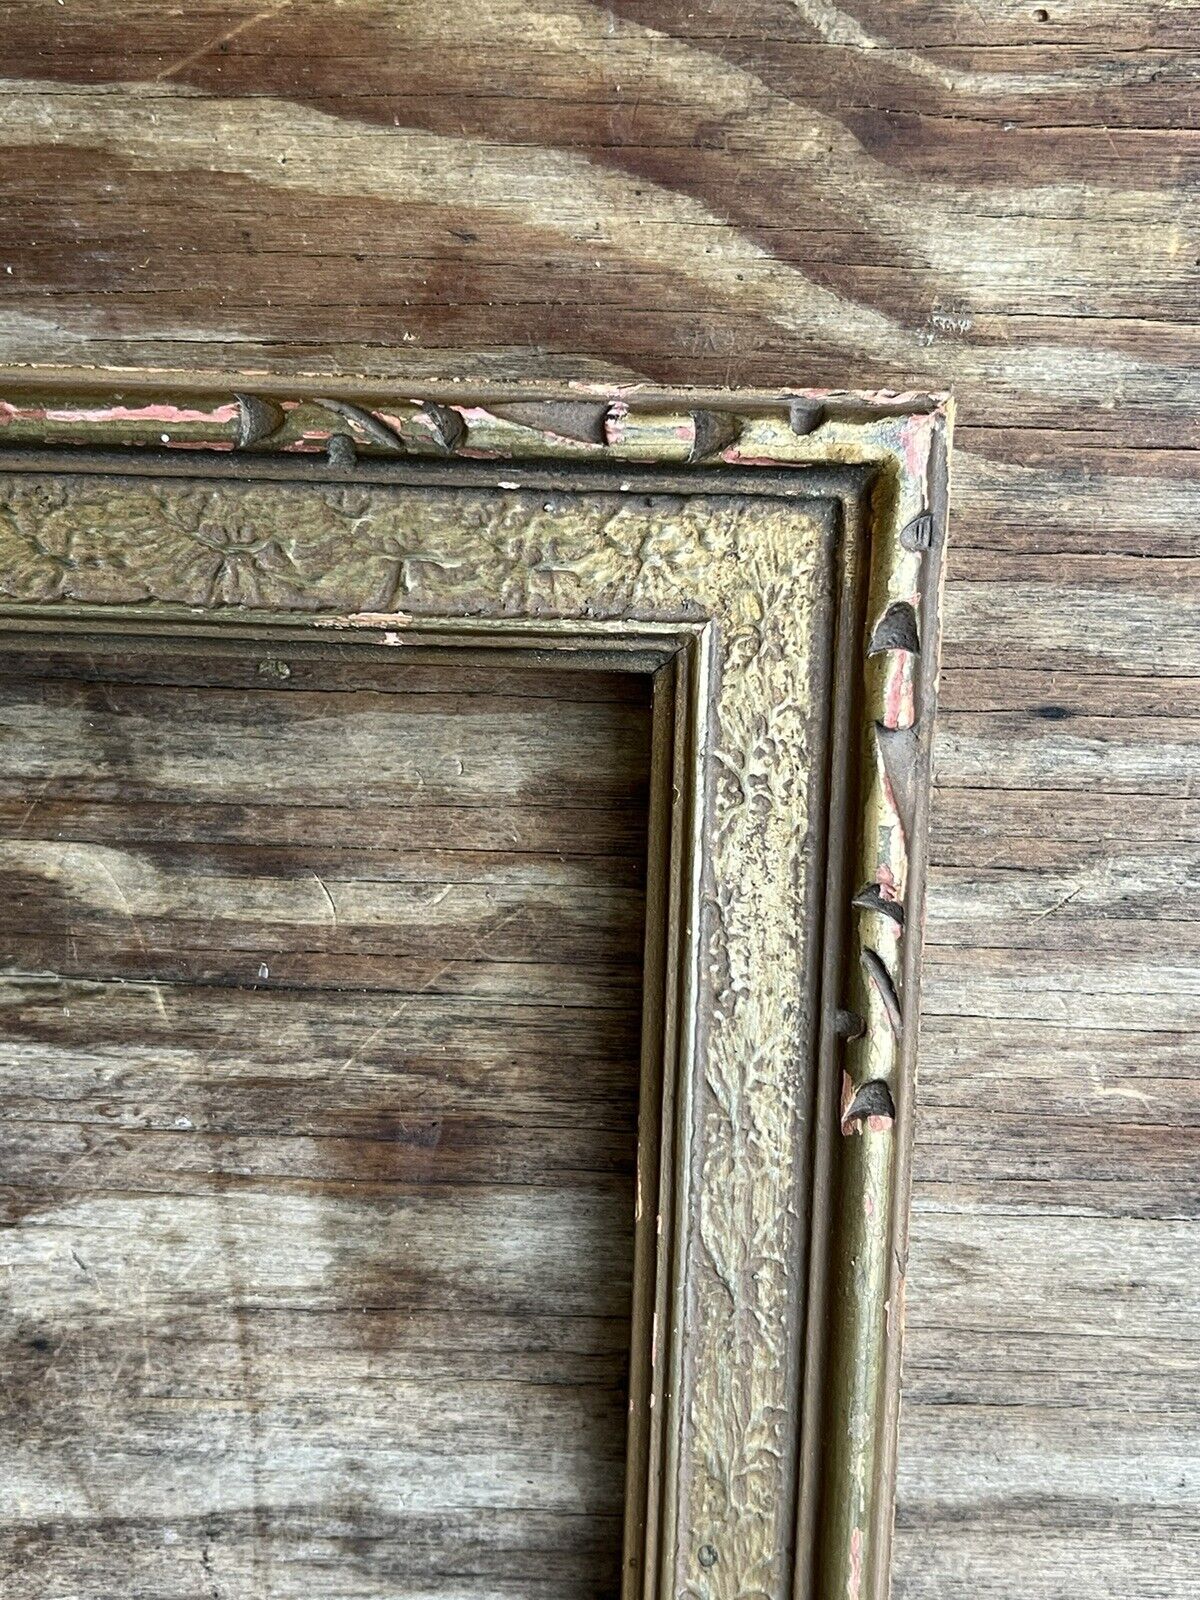 SUPERB ANTIQUE GOLD GESSO ARTS AND CRAFTS MISSION WOOD PICTURE FRAME